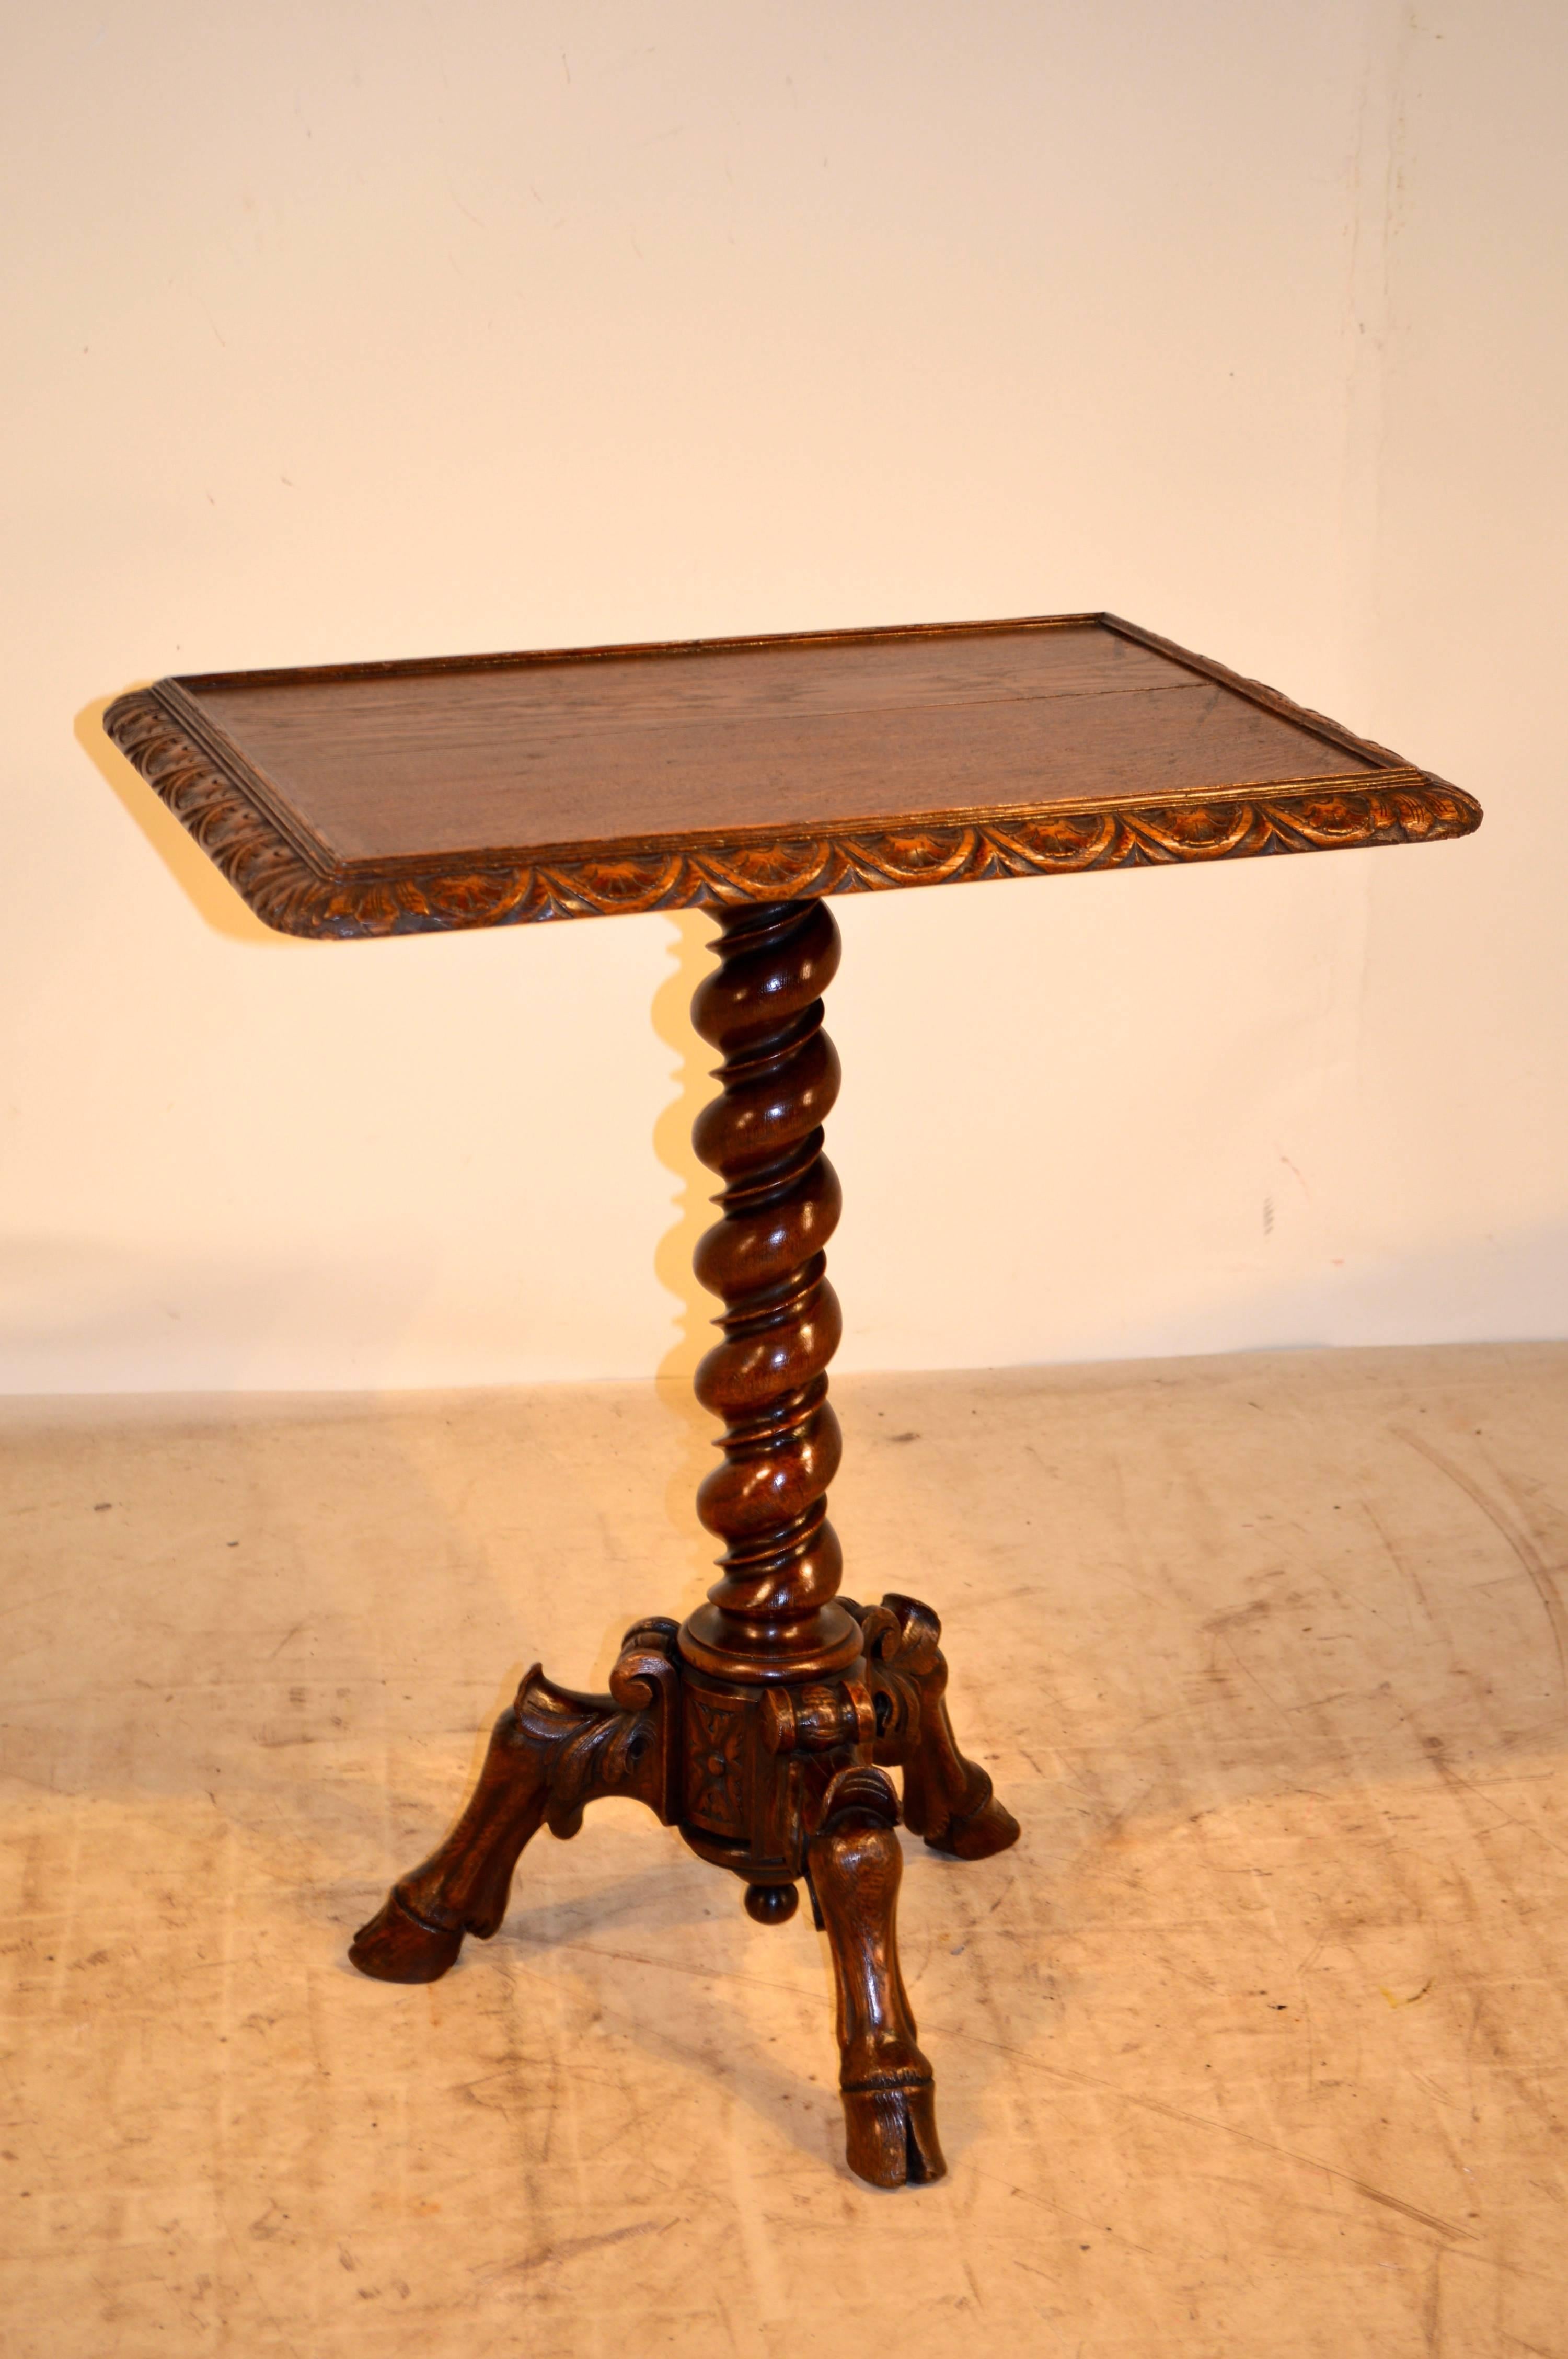 19th century, French side table with a wonderfully carved edge around the multi-layer bevelled top. The pedestal is a hand-turned barley-twist column which is resting on a wonderfully shaped and carved tripod base with hoof feet.